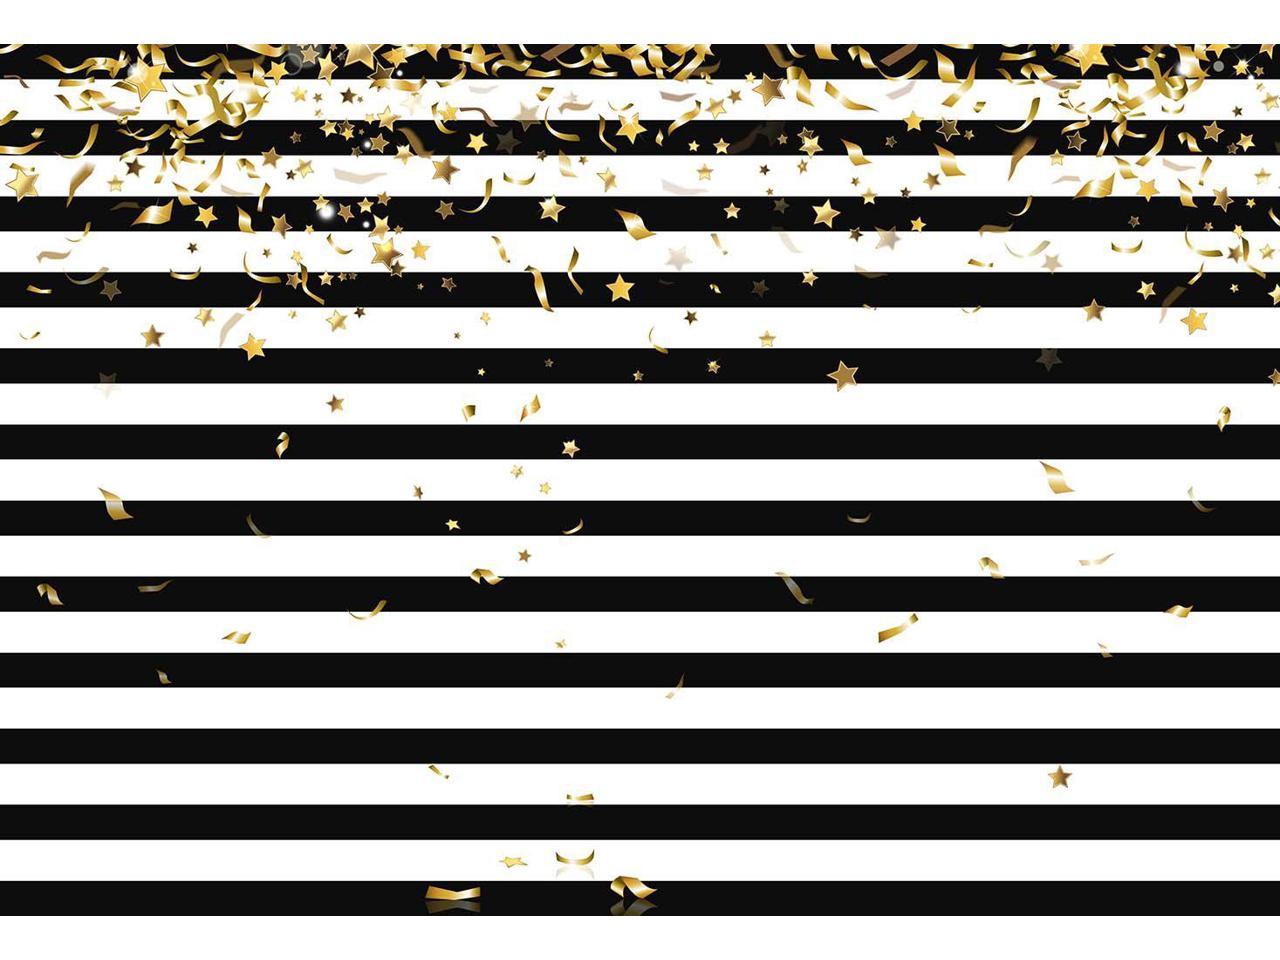 GoEoo 9x9ft Black and White Stripes Background Happy Birthday Striped Photography Background Stripy Pattern Bday Party Decor Banner Event Holiday Activity Celebration Photo Booth Studio Vinyl Props